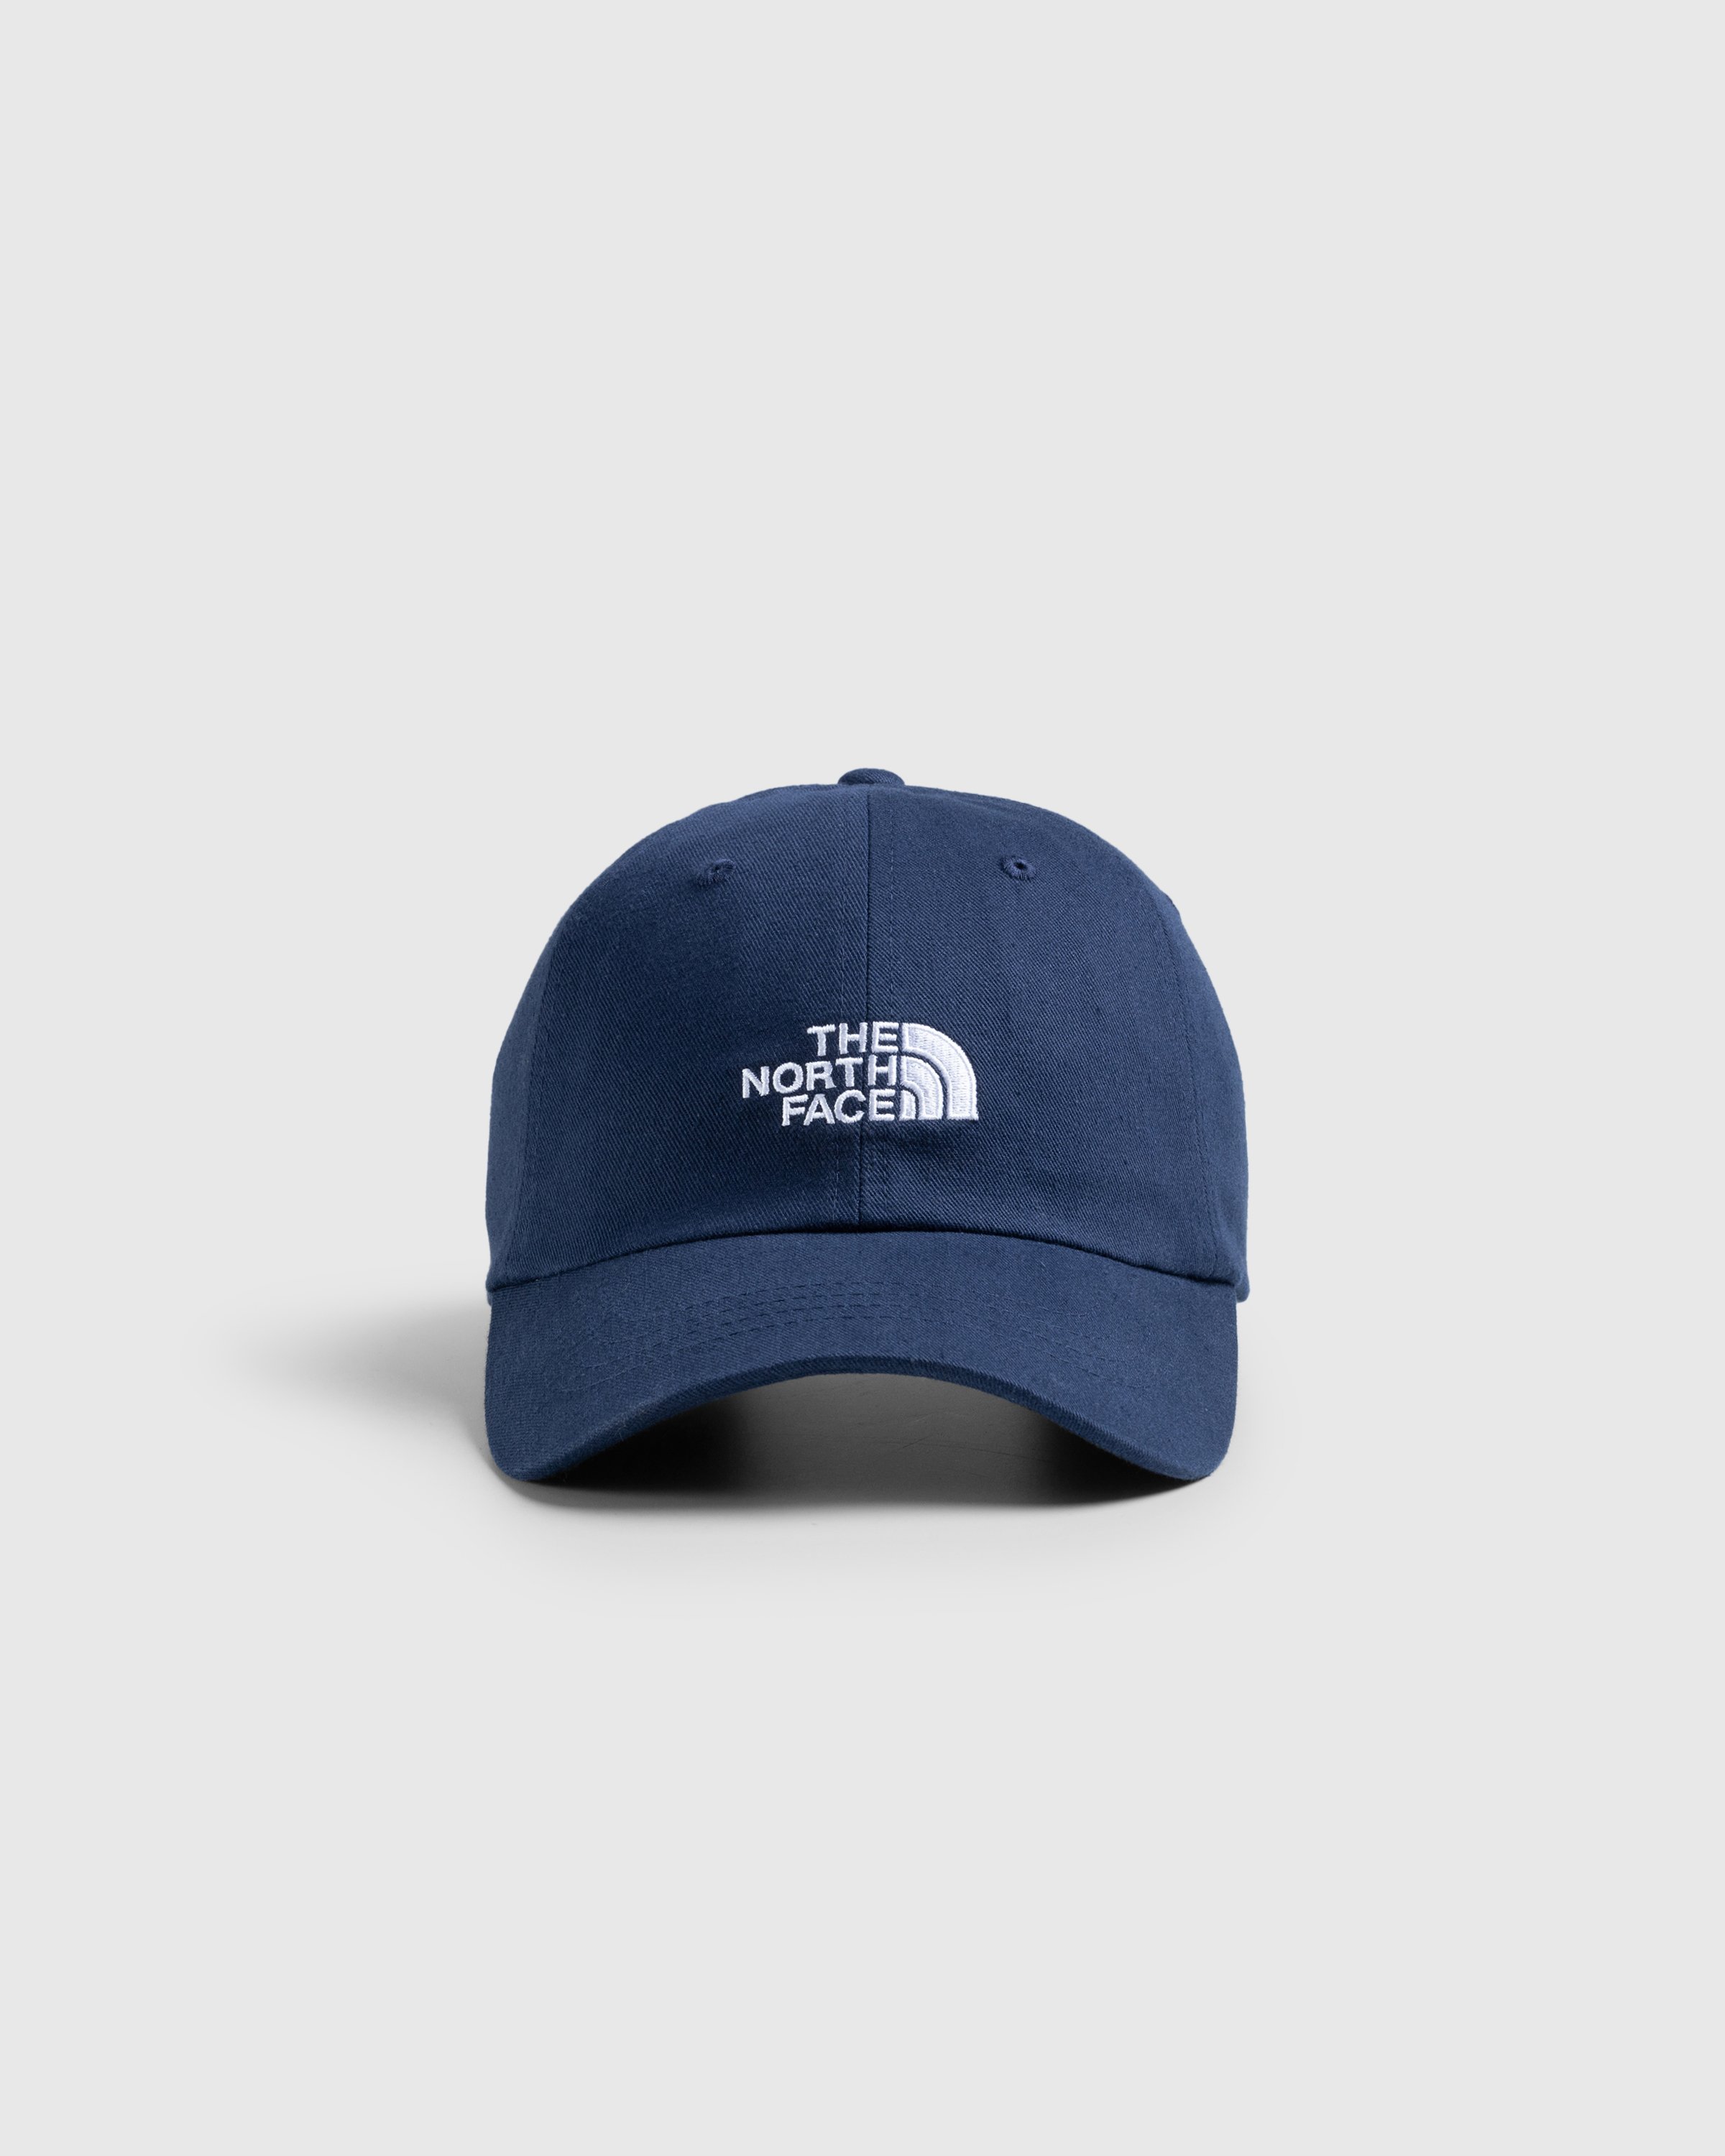 The North Face - NORM HAT SUMMIT NAVY - Accessories - Blue - Image 2